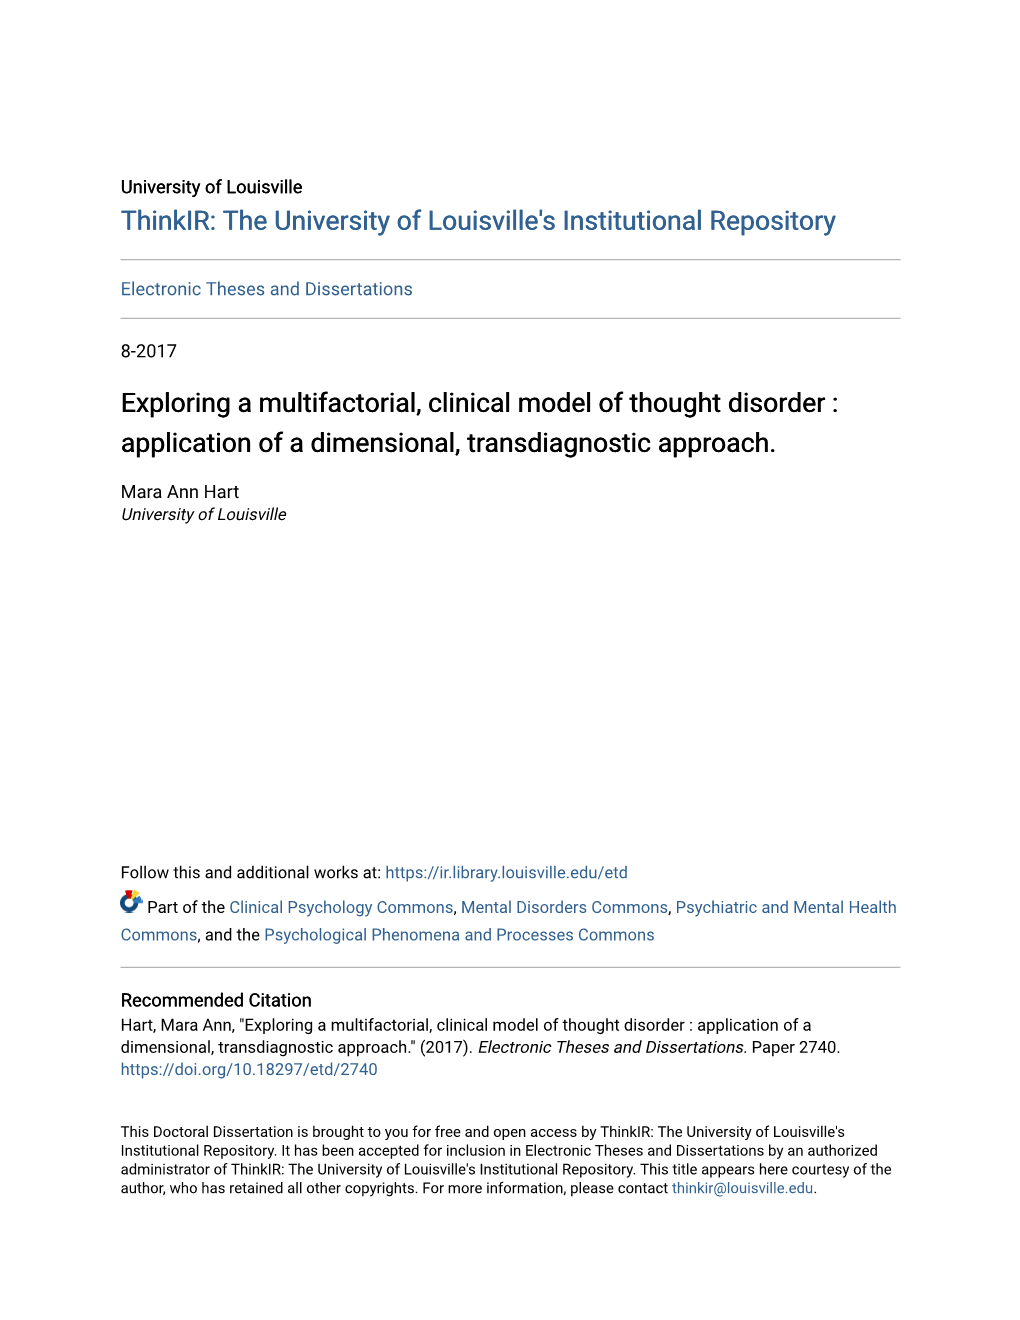 Exploring a Multifactorial, Clinical Model of Thought Disorder : Application of a Dimensional, Transdiagnostic Approach